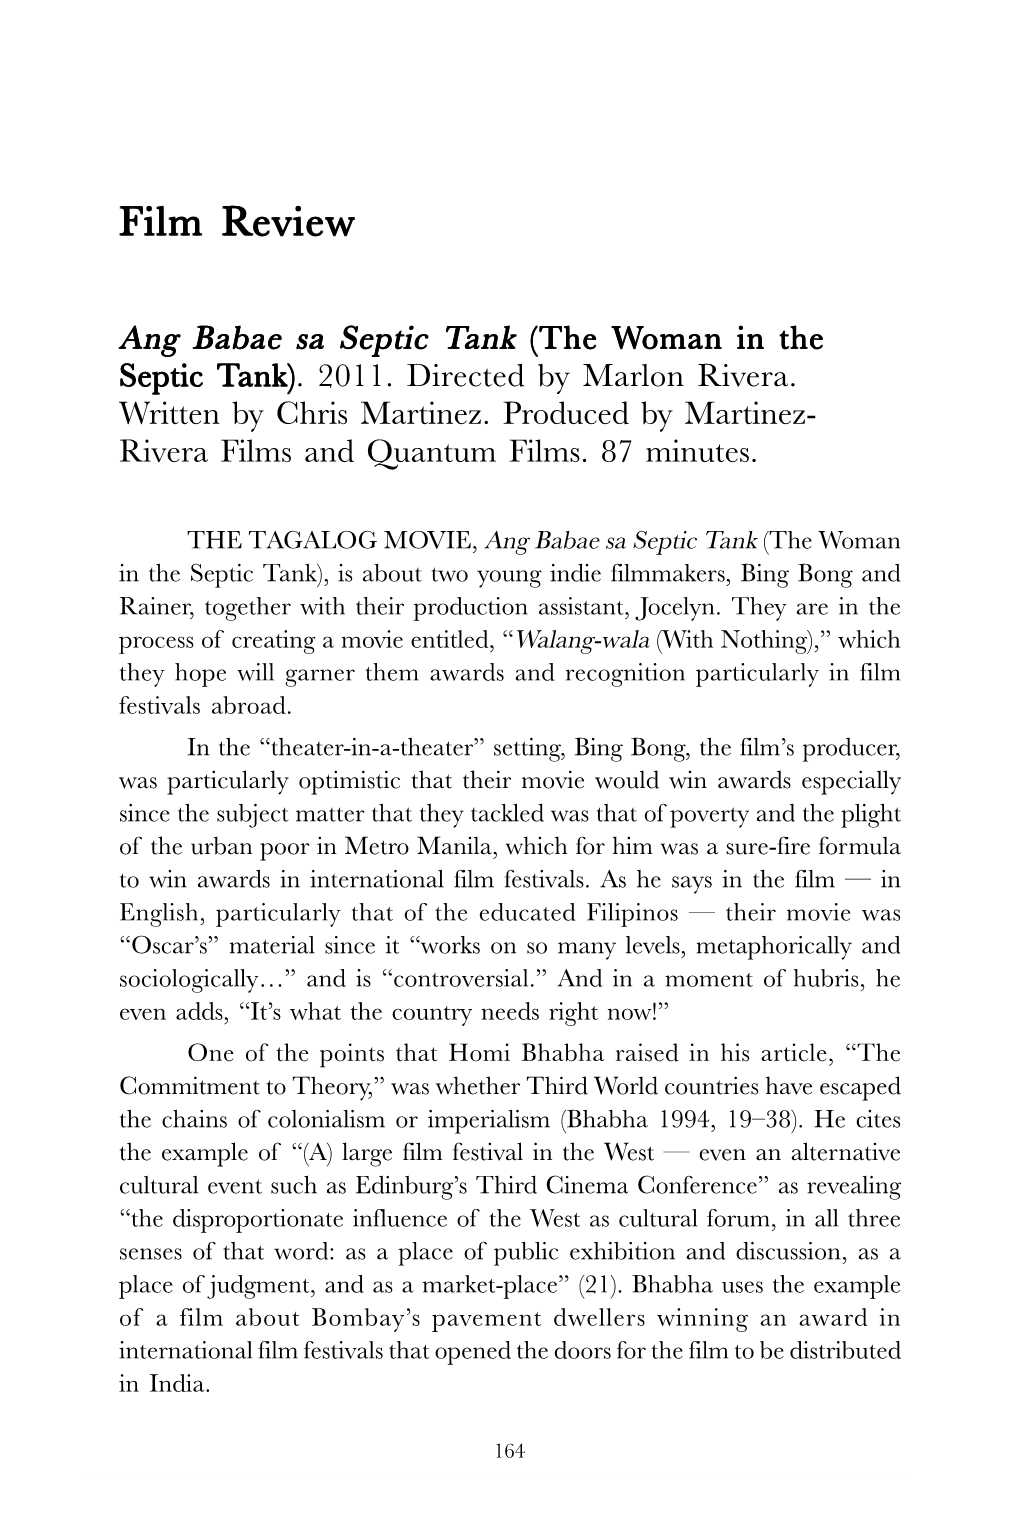 Ang Babae Sa Septic Tank (The Woman in the Septic Tank), Is About Two Young Indie Filmmakers, Bing Bong and Rainer, Together with Their Production Assistant, Jocelyn